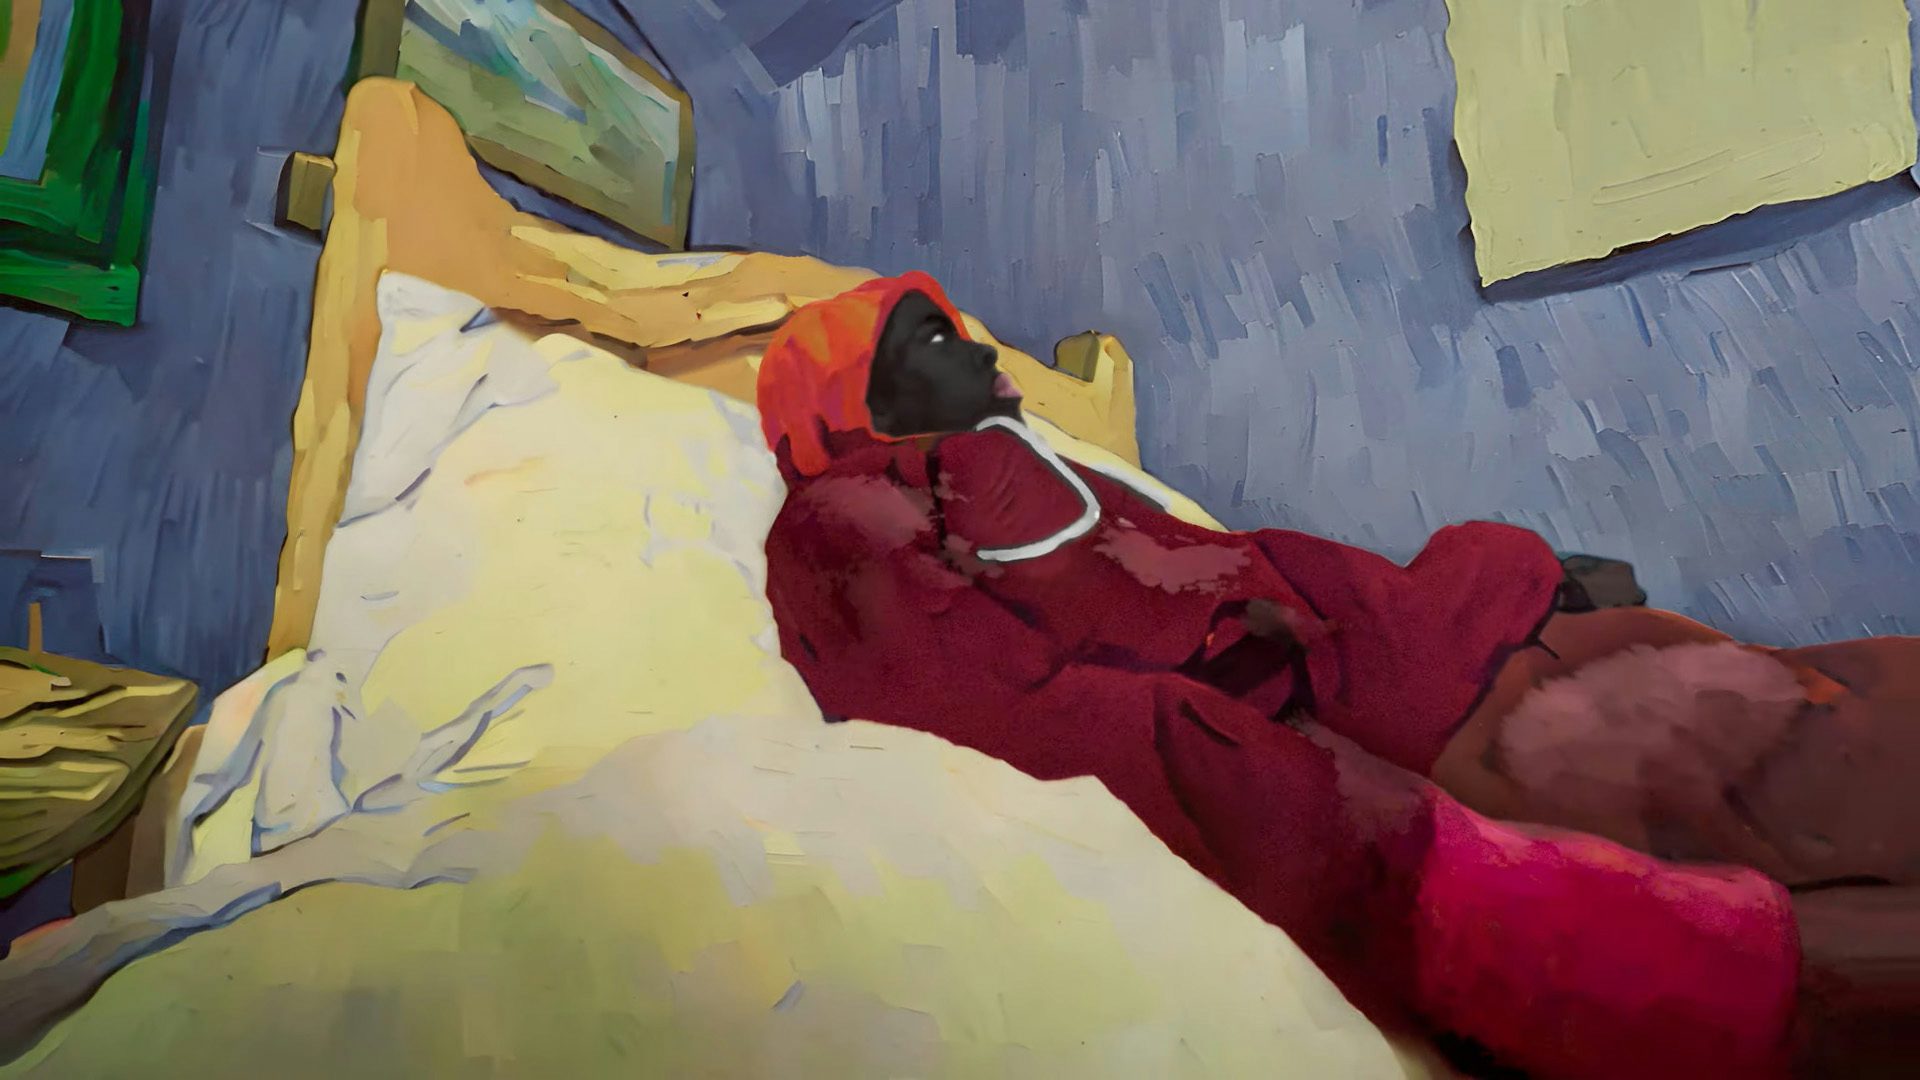 Image shows a young person wearing a red tracksuit lying on a bed supposedly in Van Gogh's painting The Bedroom, as seen in Coca-Cola ad Masterpiece